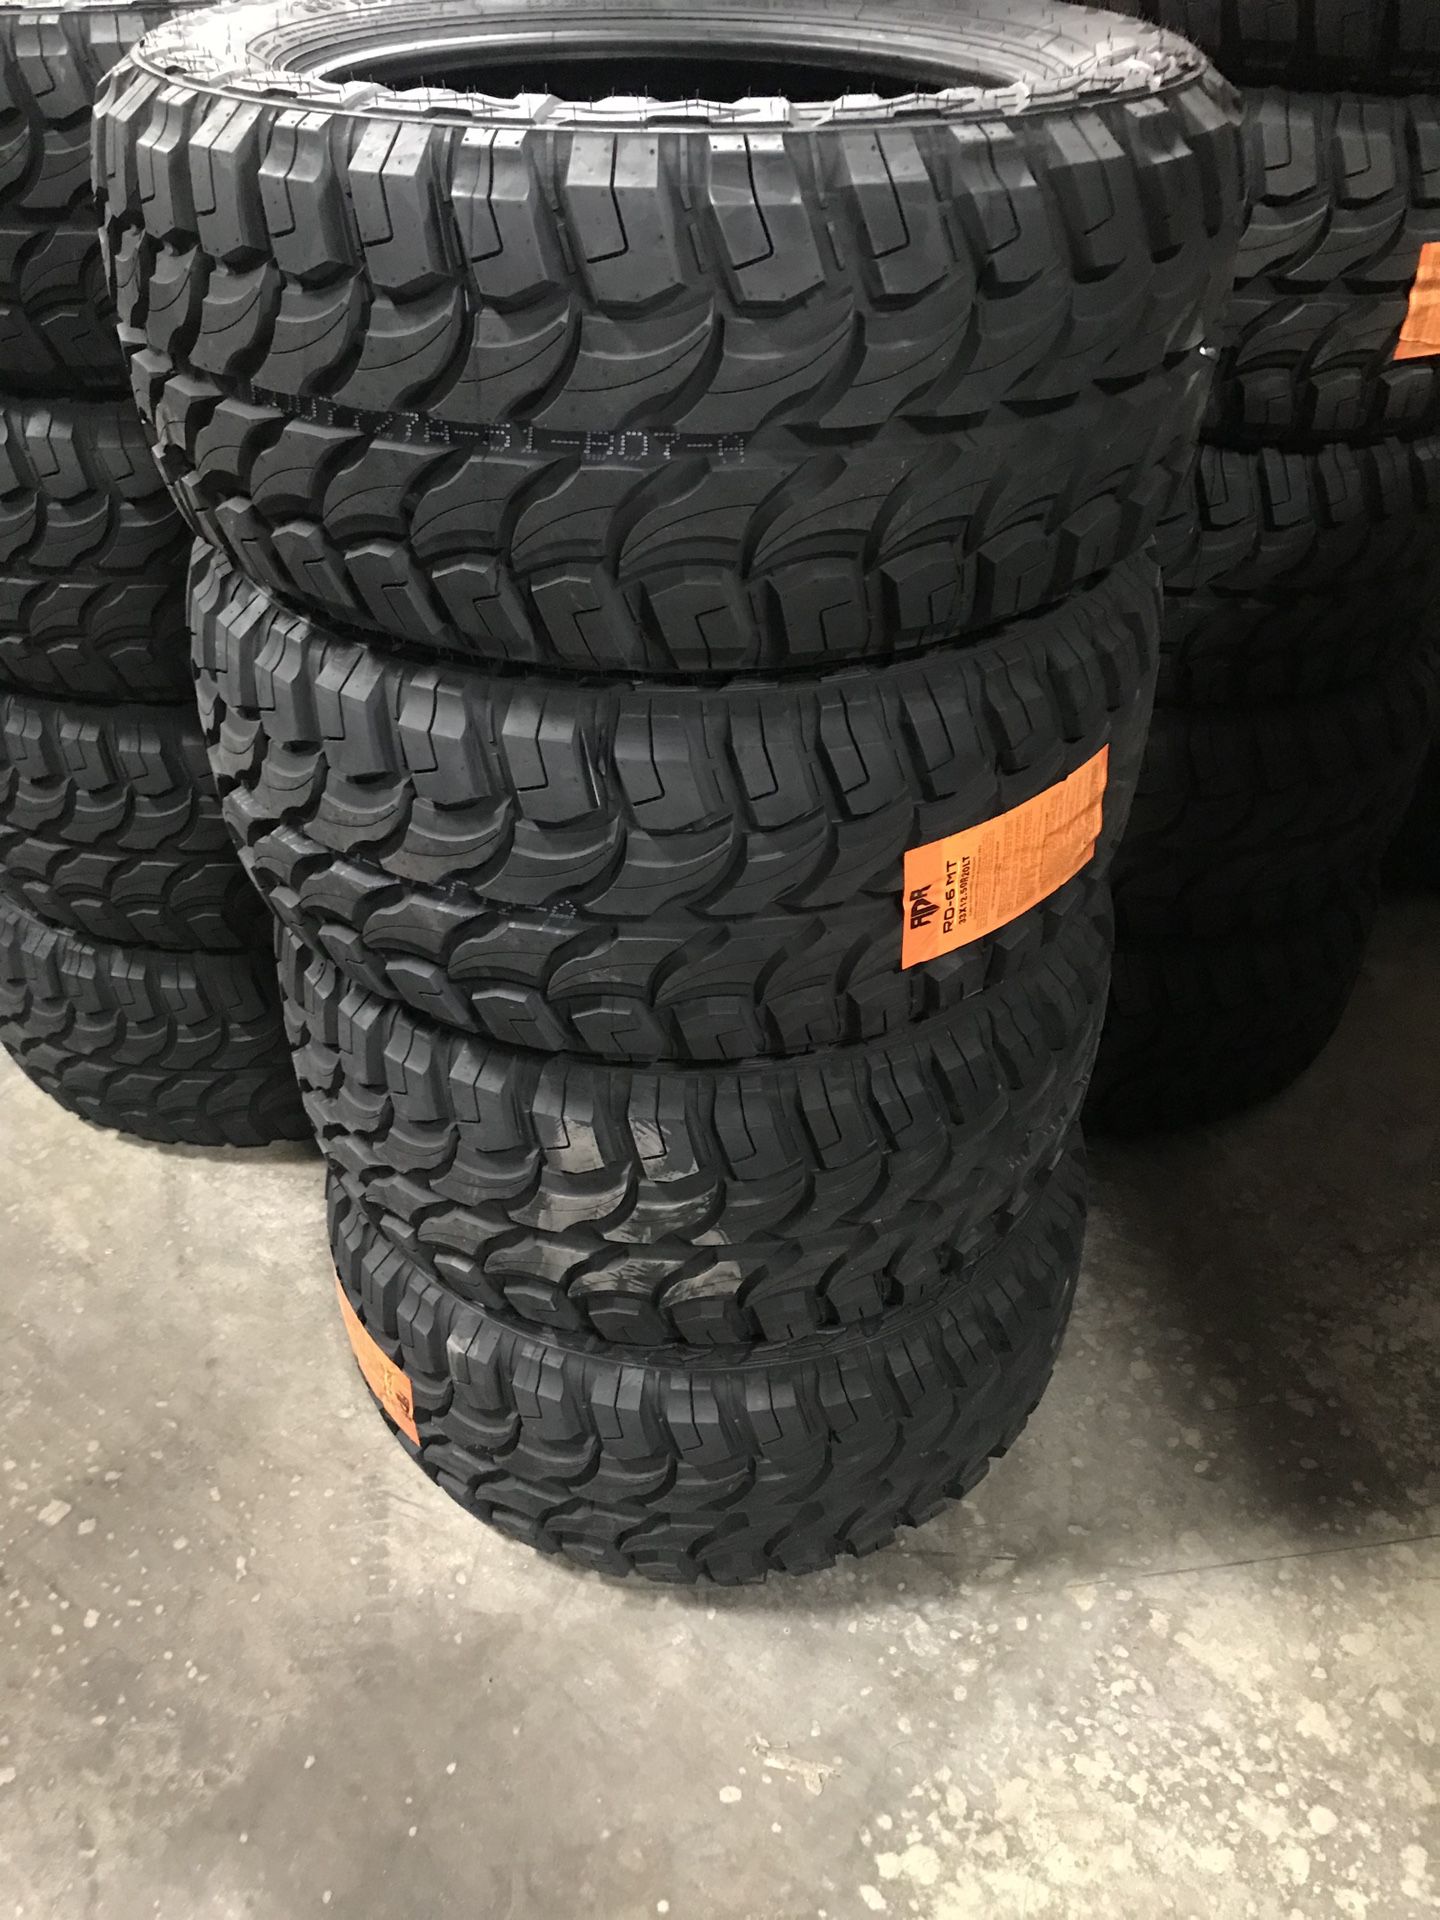 33” and 35” tires available $640 - $740 for 20” wheel